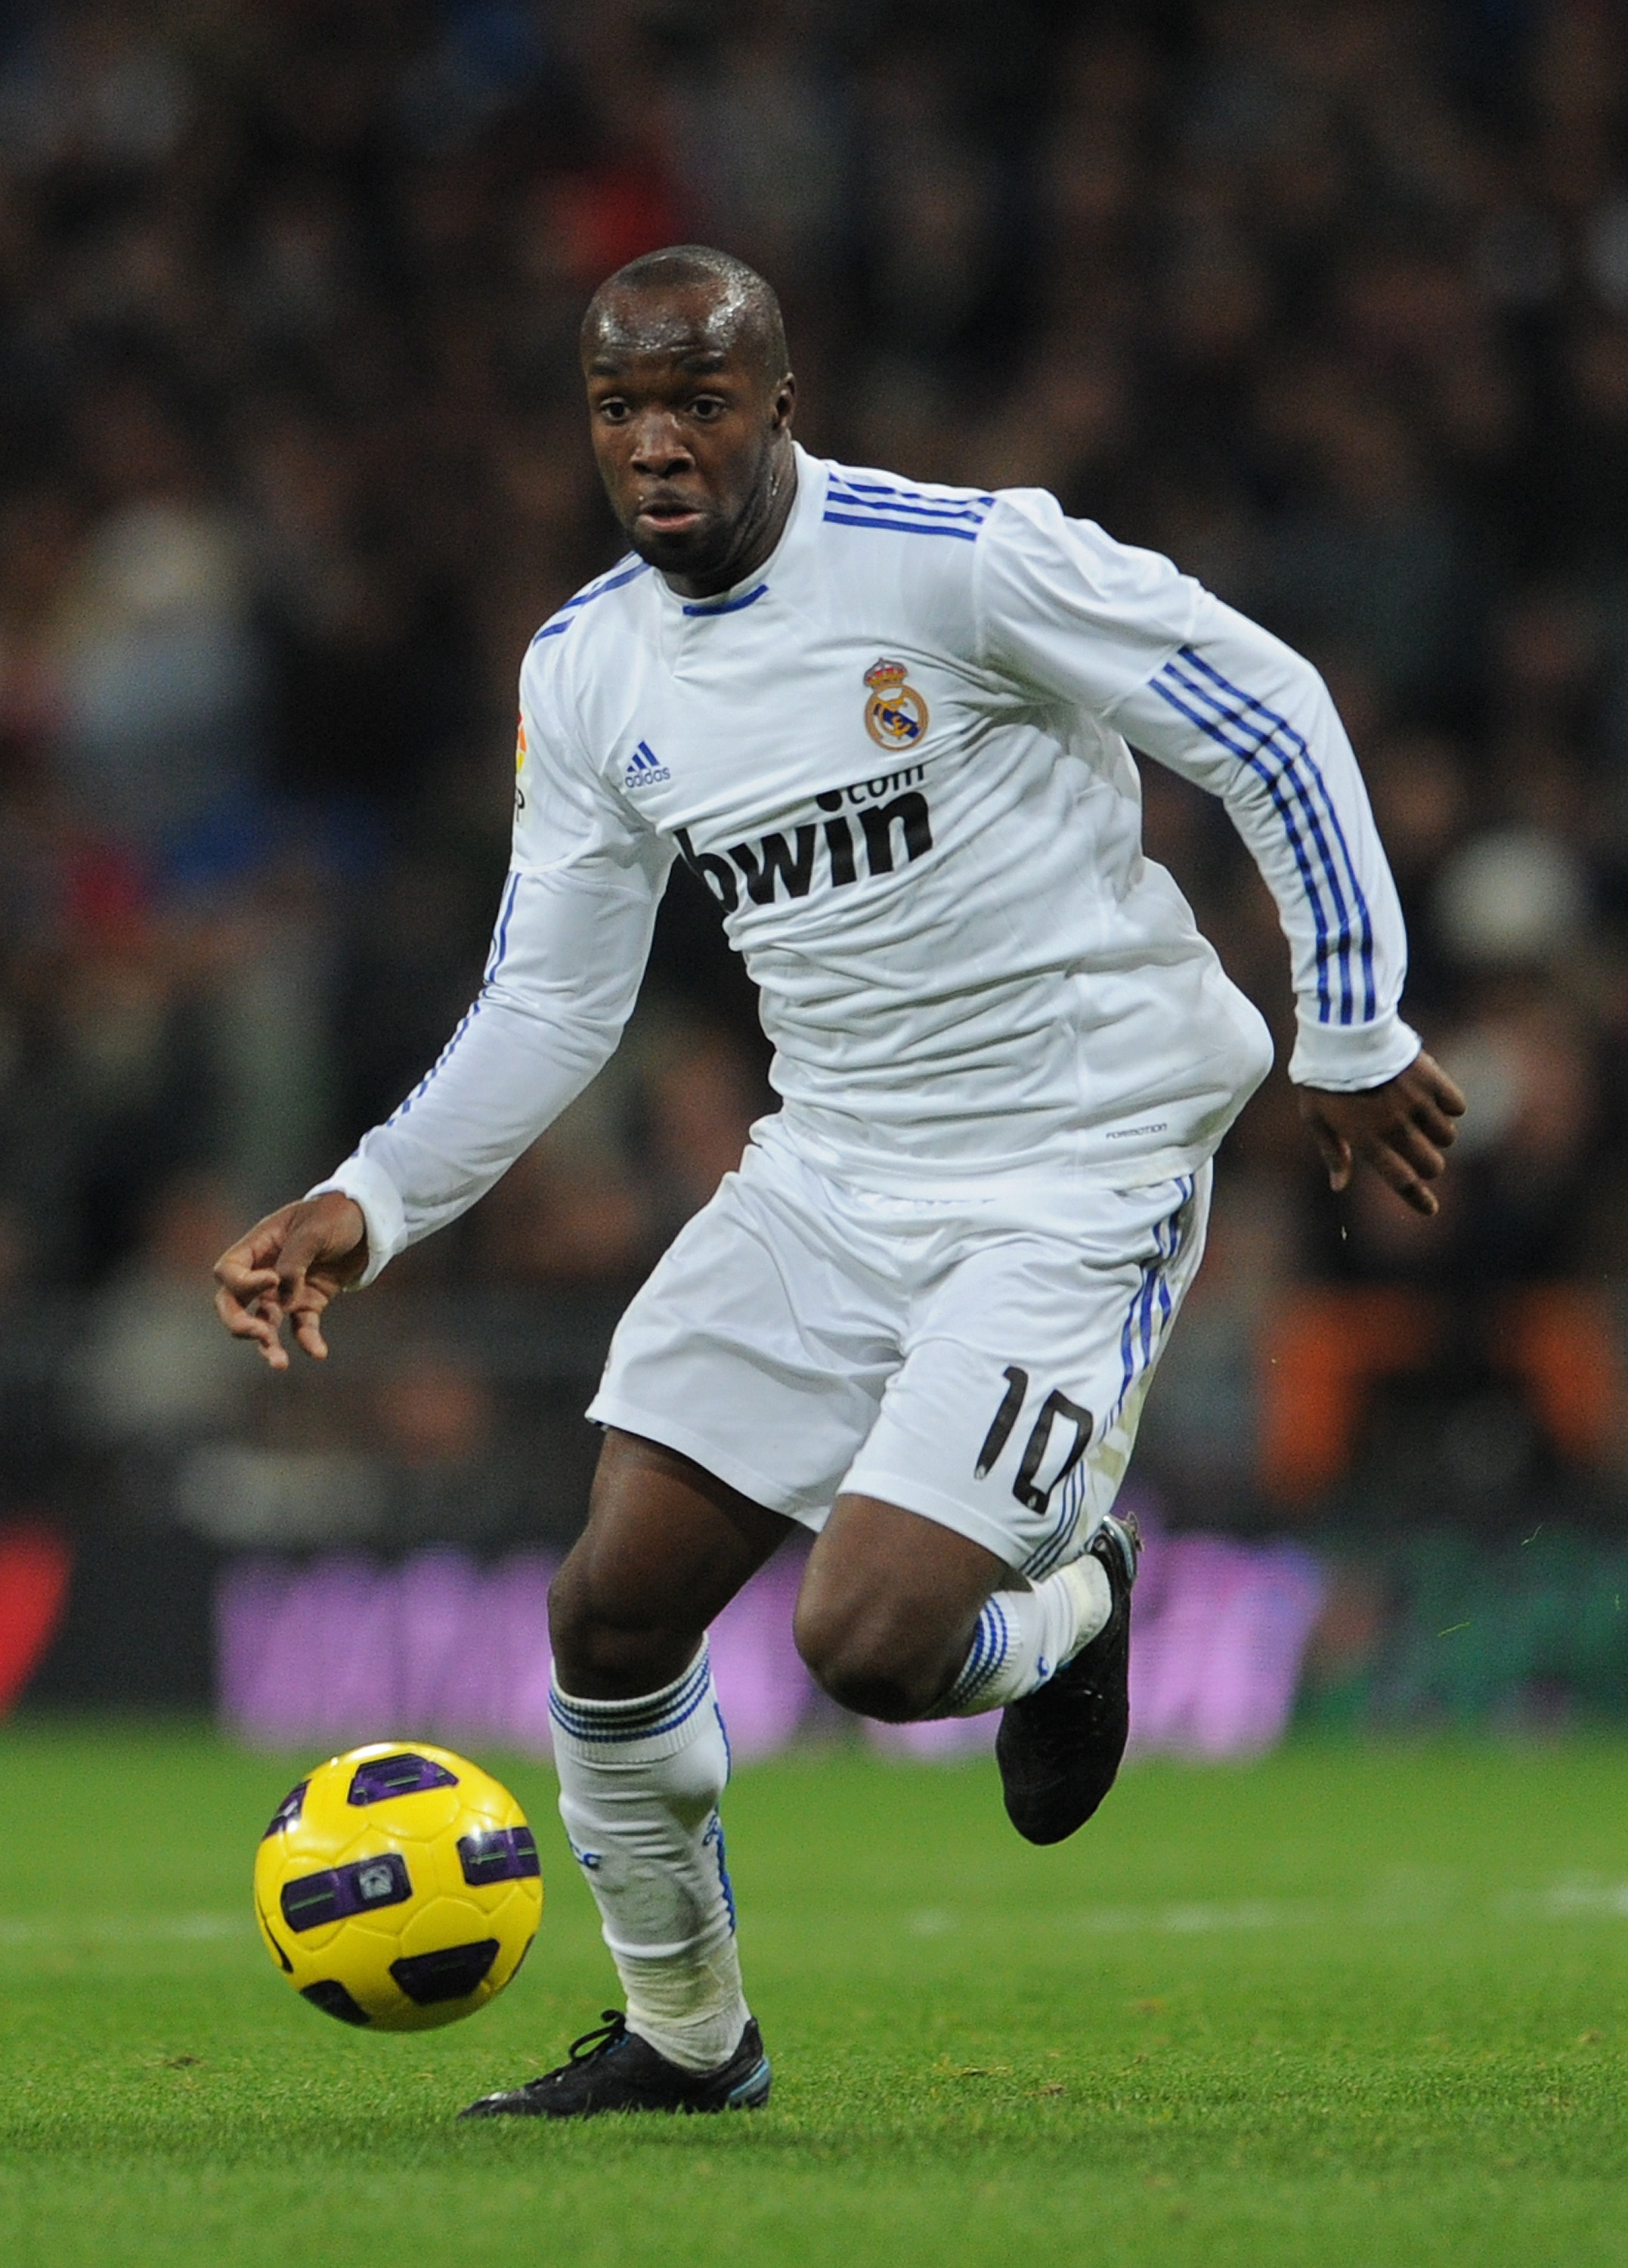 MADRID, SPAIN - DECEMBER 04:  Lassana Diarra of Real Madrid runs with the ball during the La Liga match between Real Madrid and Valencia at Estadio Santiago Bernabeu on December 4, 2010 in Madrid, Spain.  (Photo by Jasper Juinen/Getty Images)